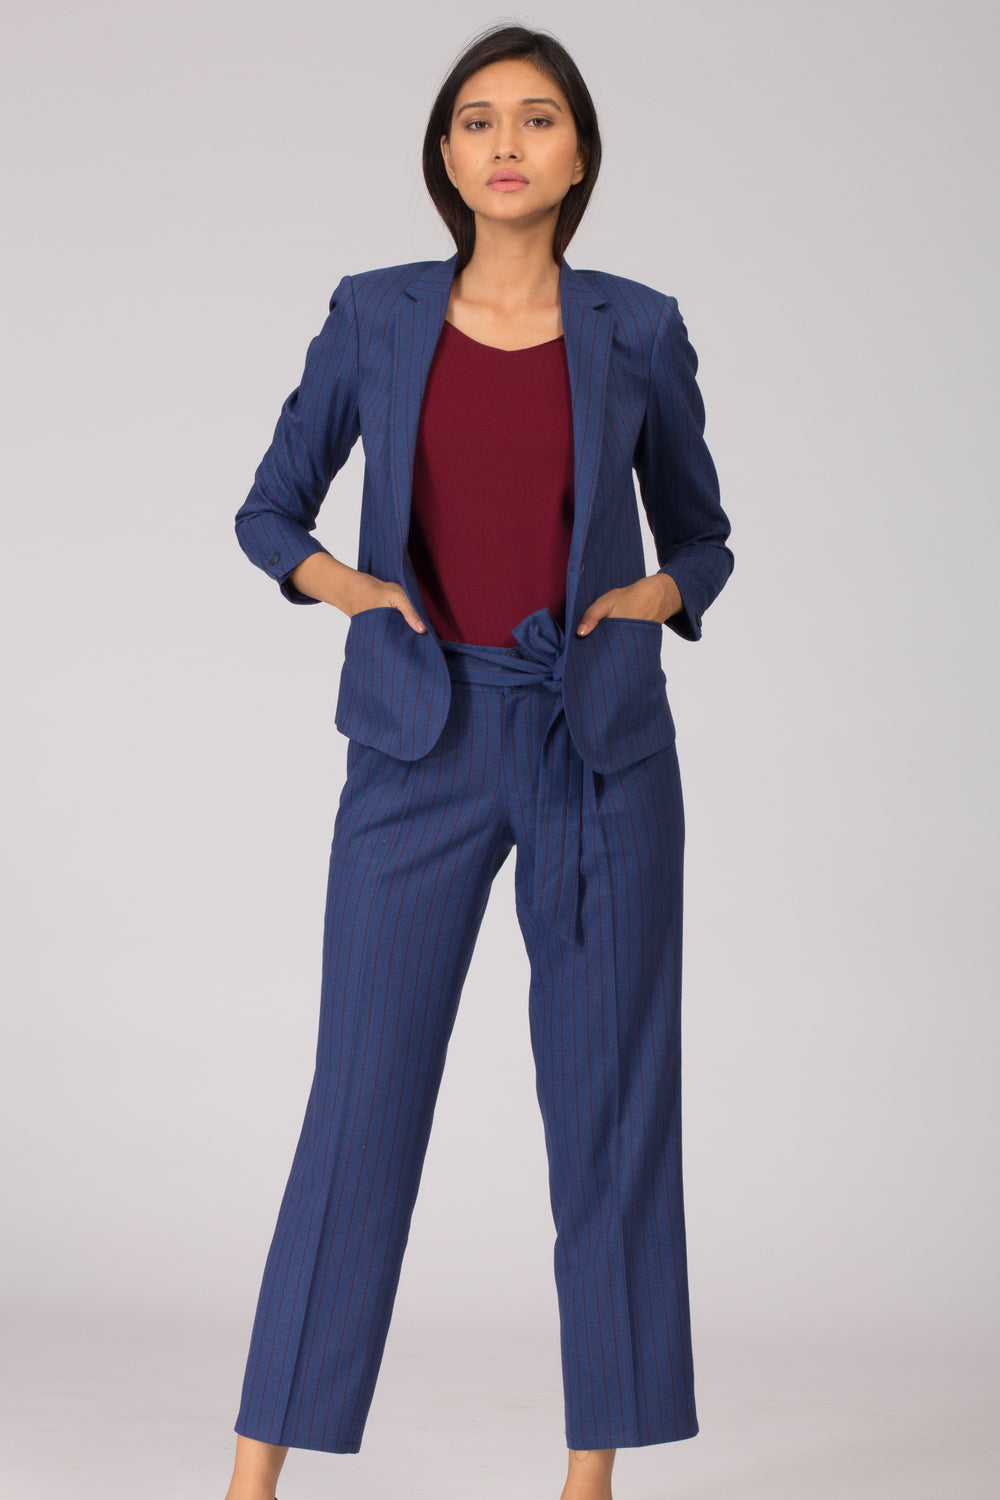 Grey women's formal pants and trousers for office. Shop online for well fitted and plus size formal trousers and pants at www.intermod.in